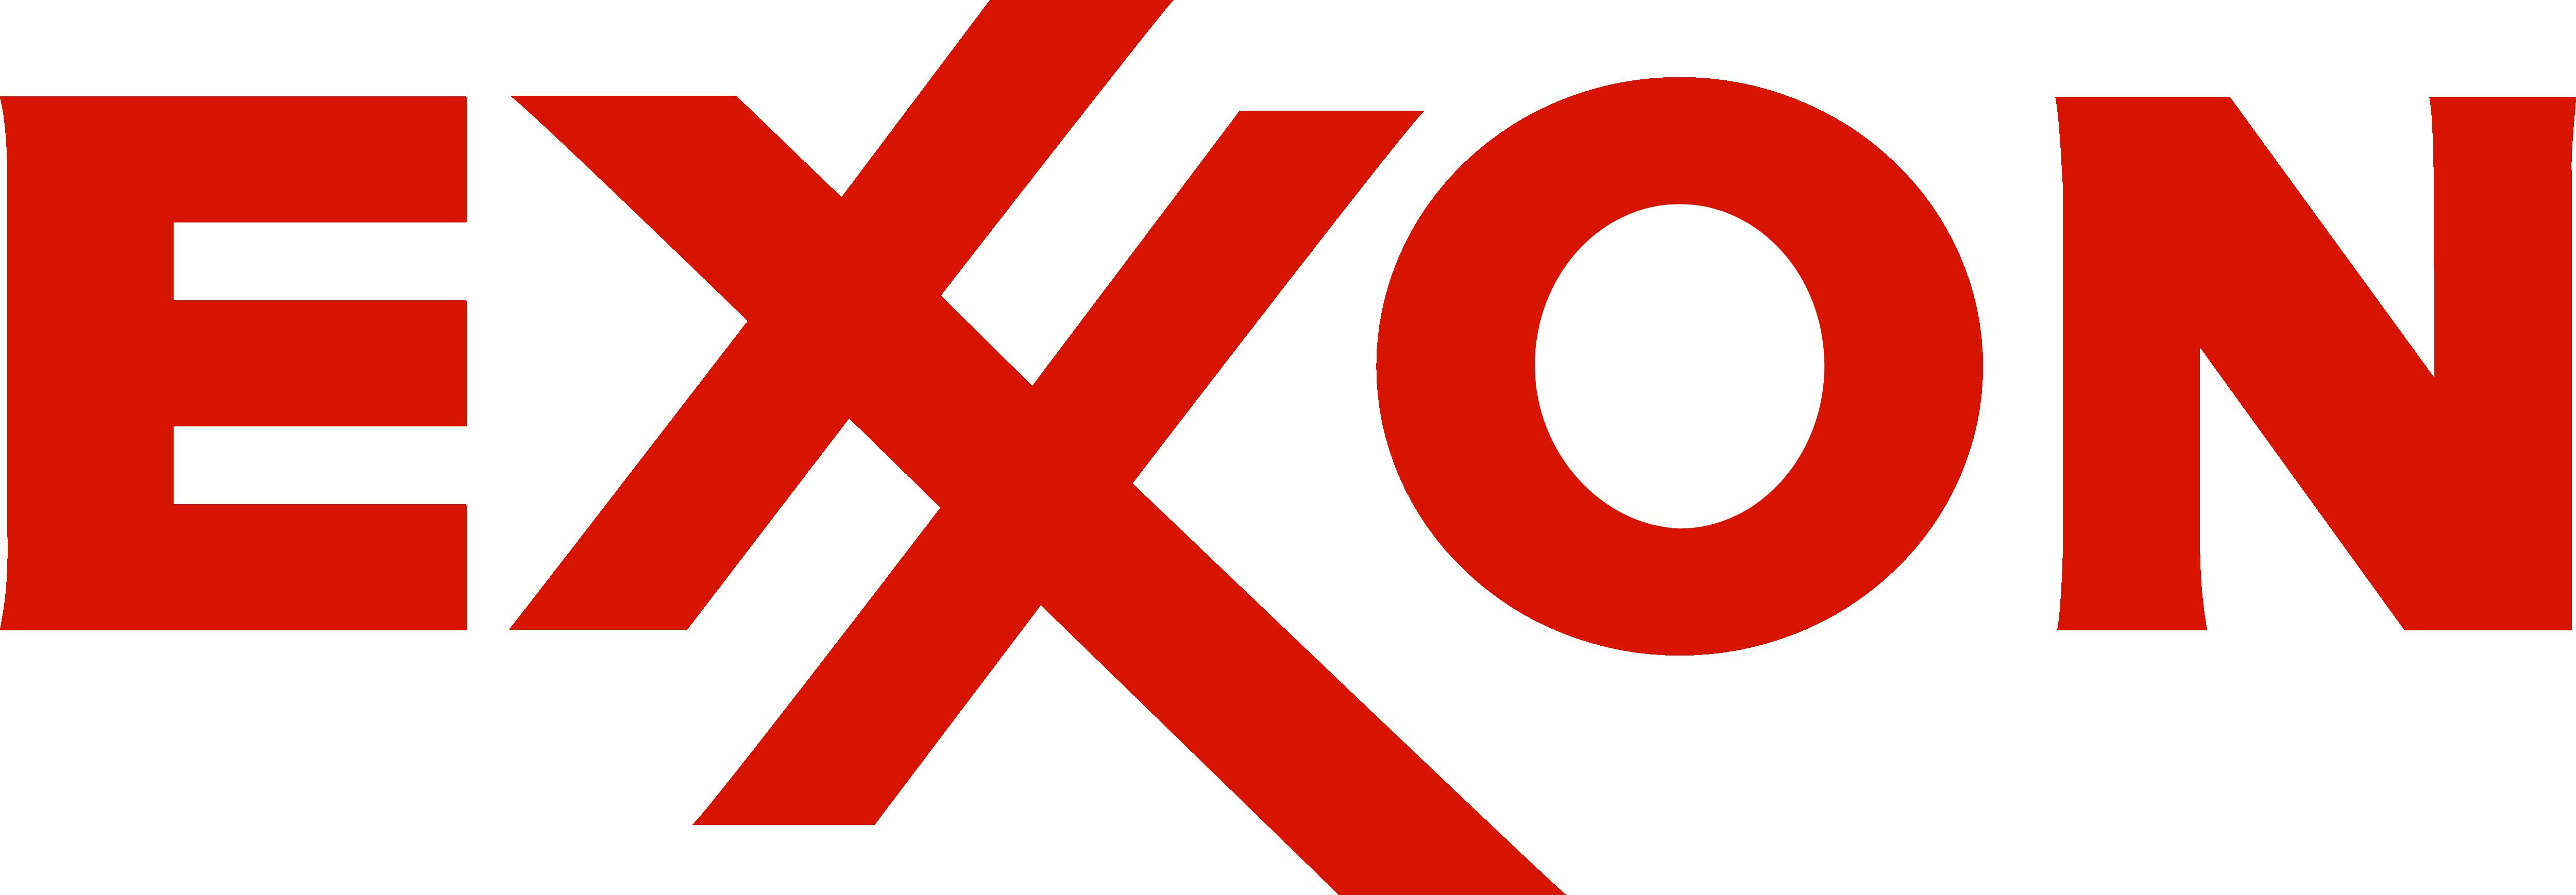 After five years of exploration Exxon (XOM) abandons drilling off the coast of Brazil